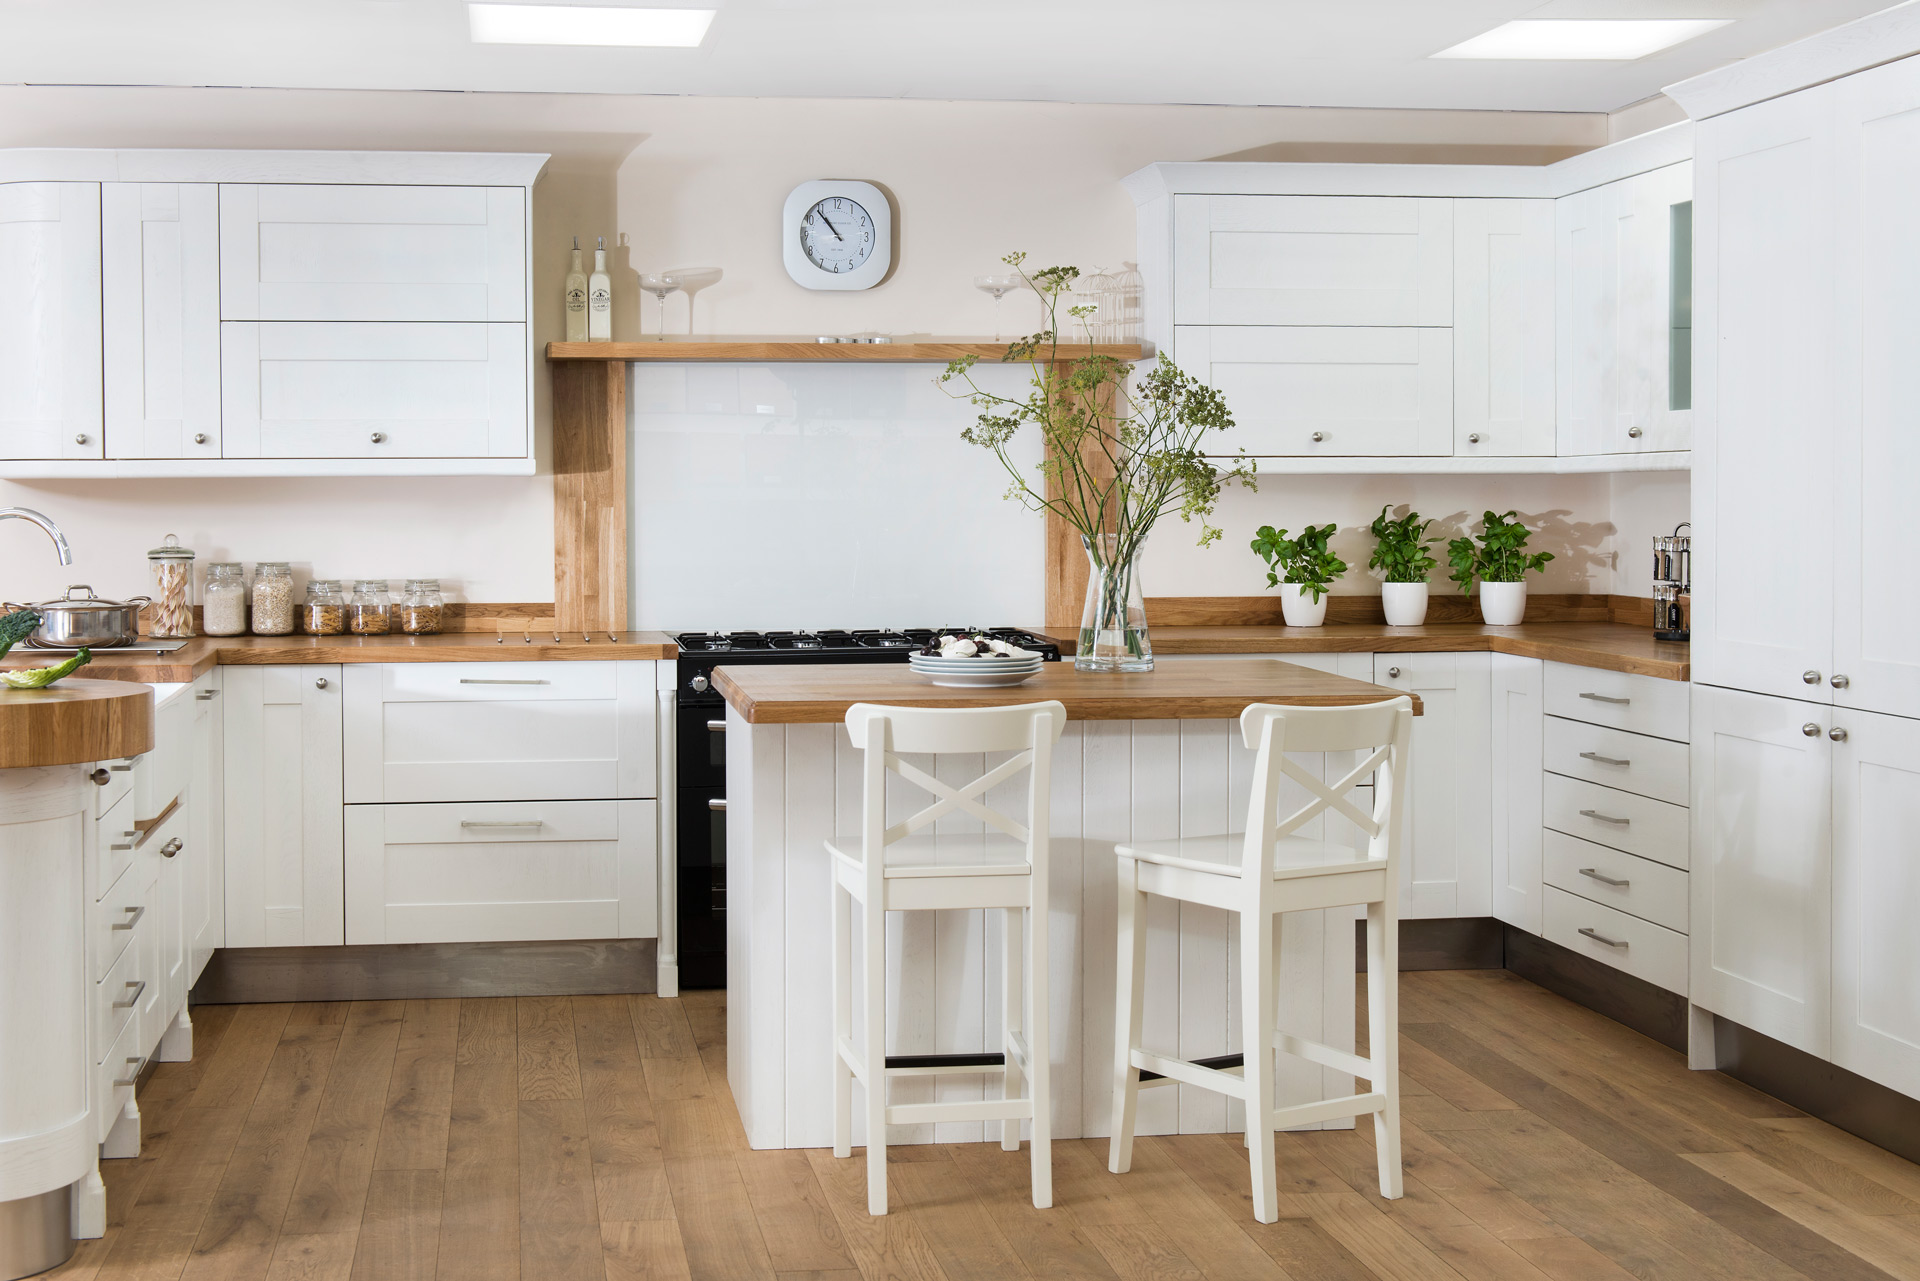 Solid Wood Solid Oak Kitchen Cabinets From Solid Oak Kitchen